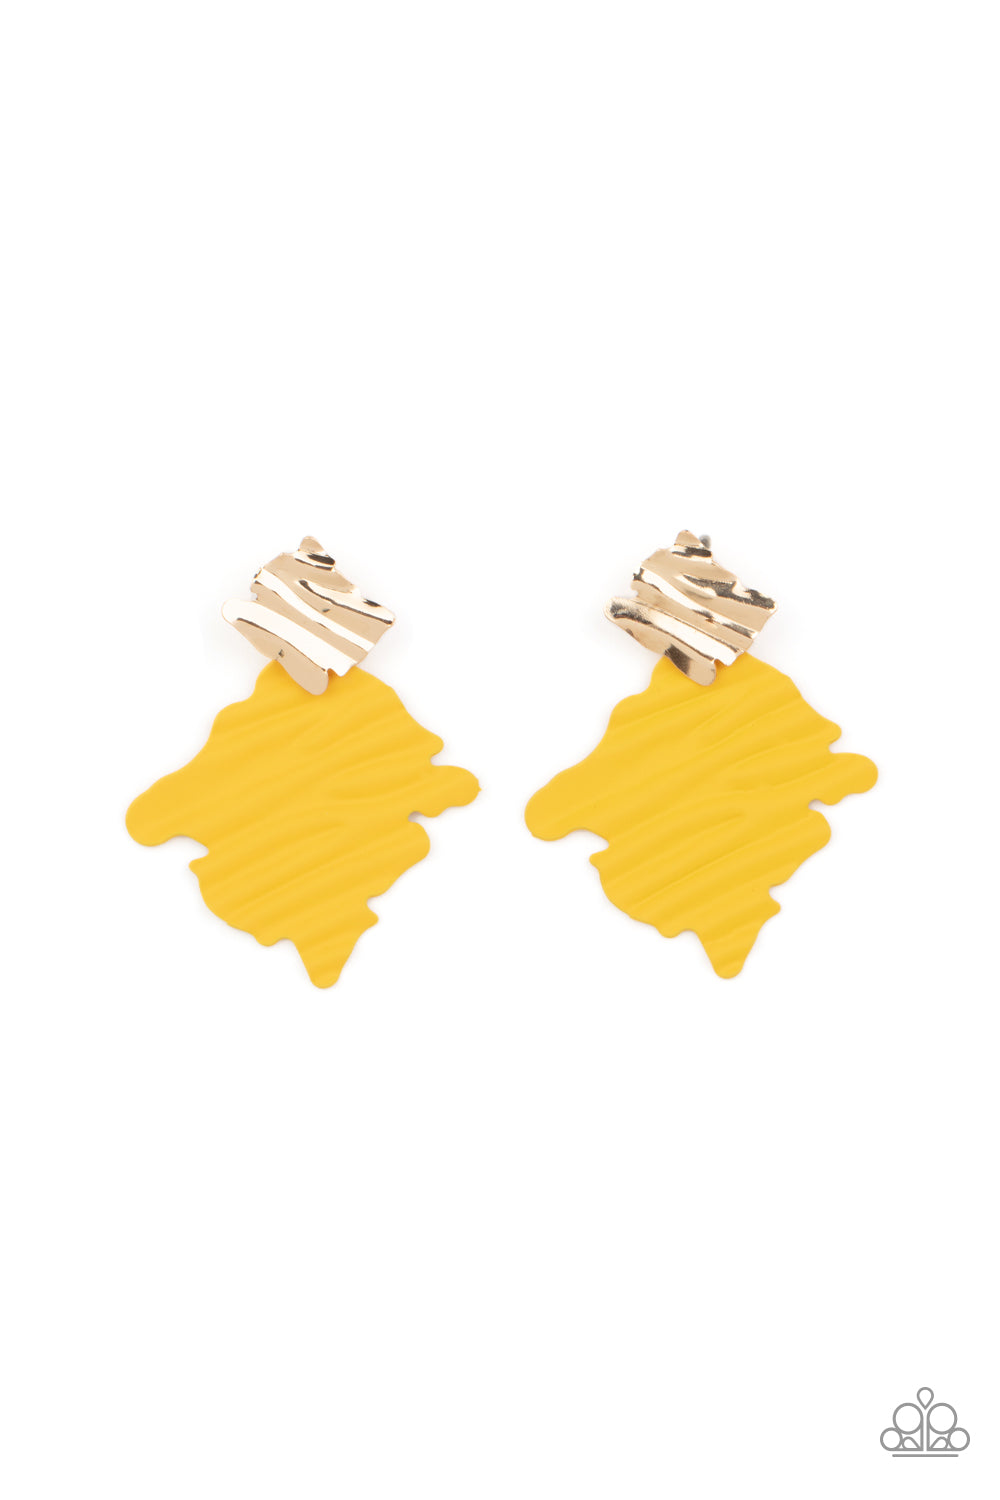 Crimped Couture - Yellow & Gold Earrings - Princess Glam Shop